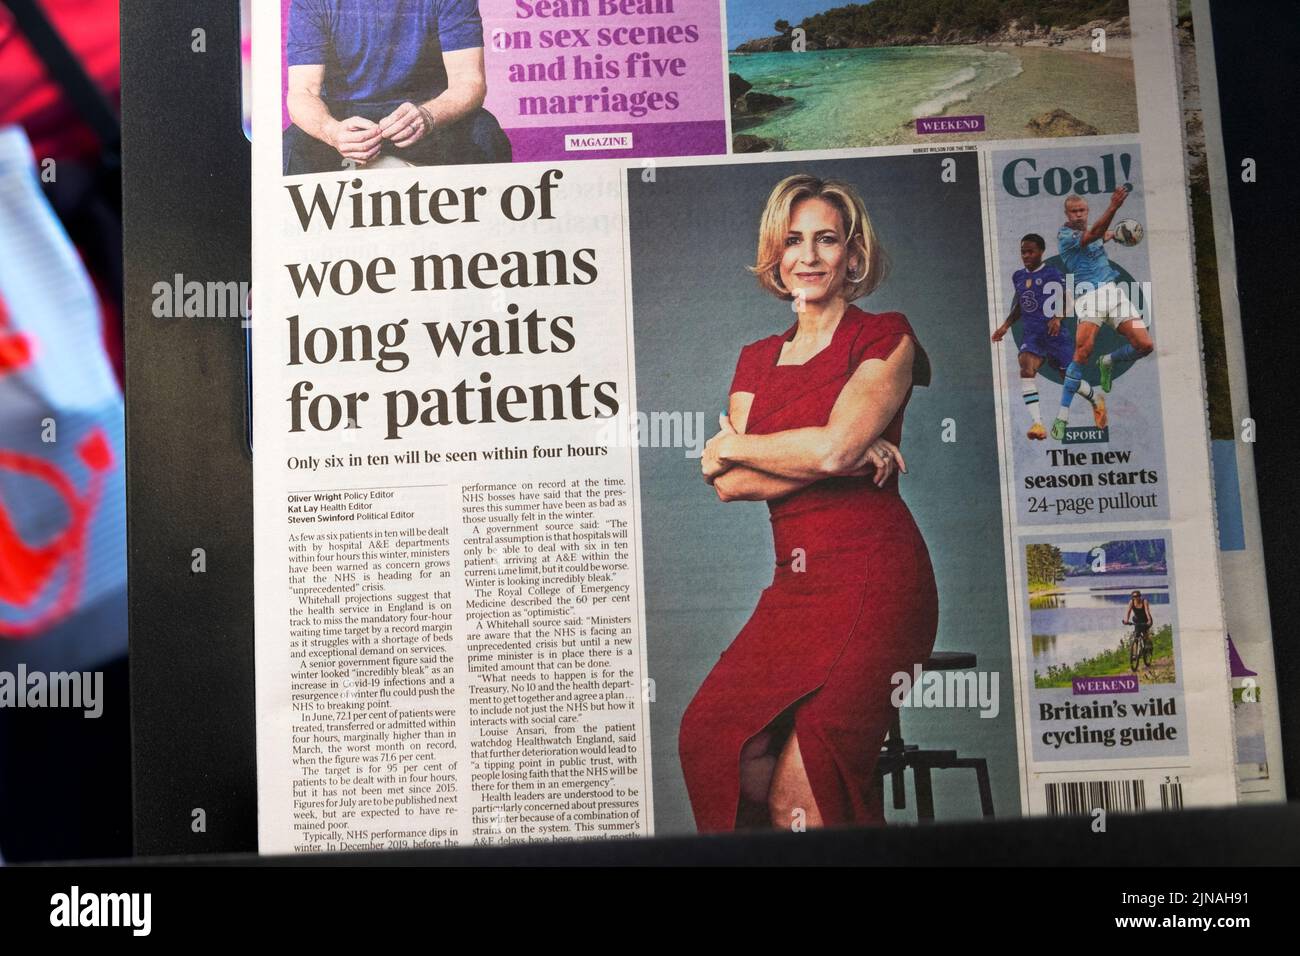 'Winter of woe means ong waits for patients' The Times newspaper headline front page on 6 August 2022 in London England UK Stock Photo